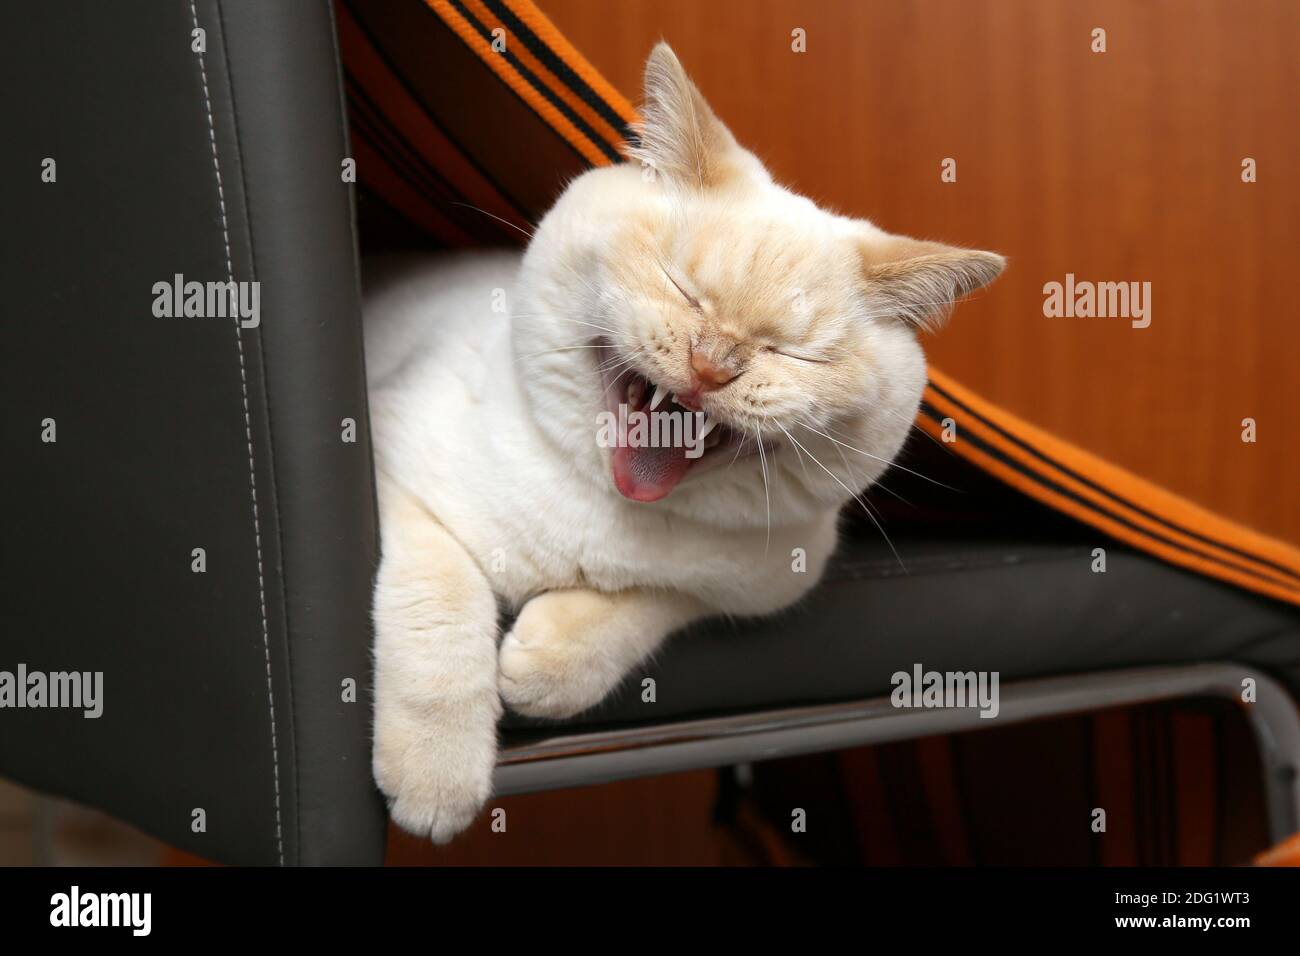 British cat yawns after a nap on a chair Stock Photo